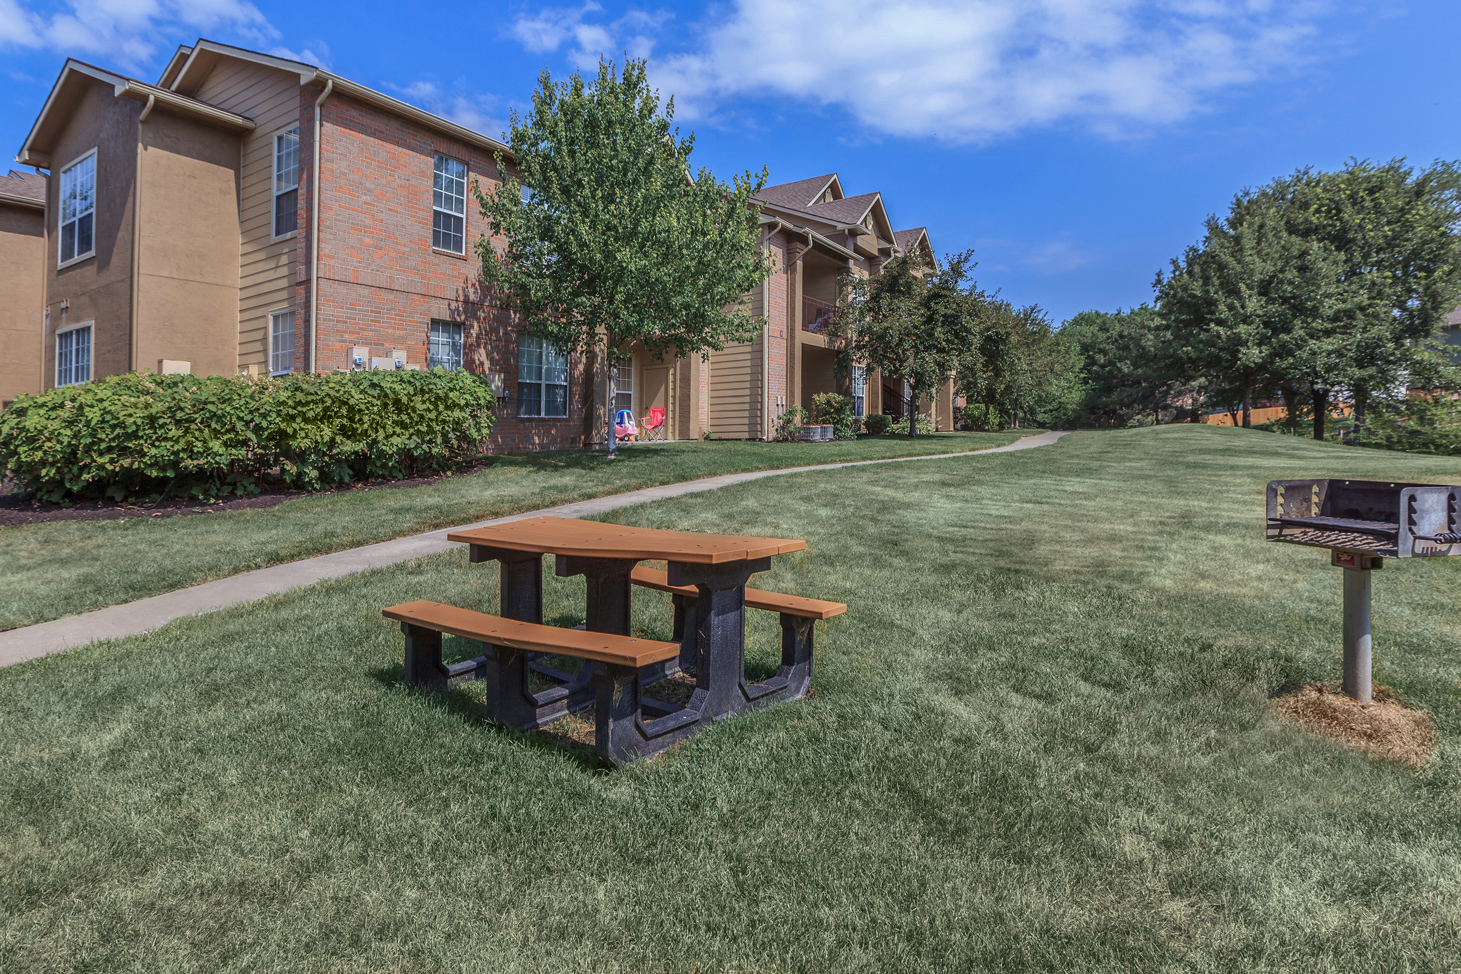 Picnic Area at Crowne Chase Apartment Homes, Overland Park, 66210